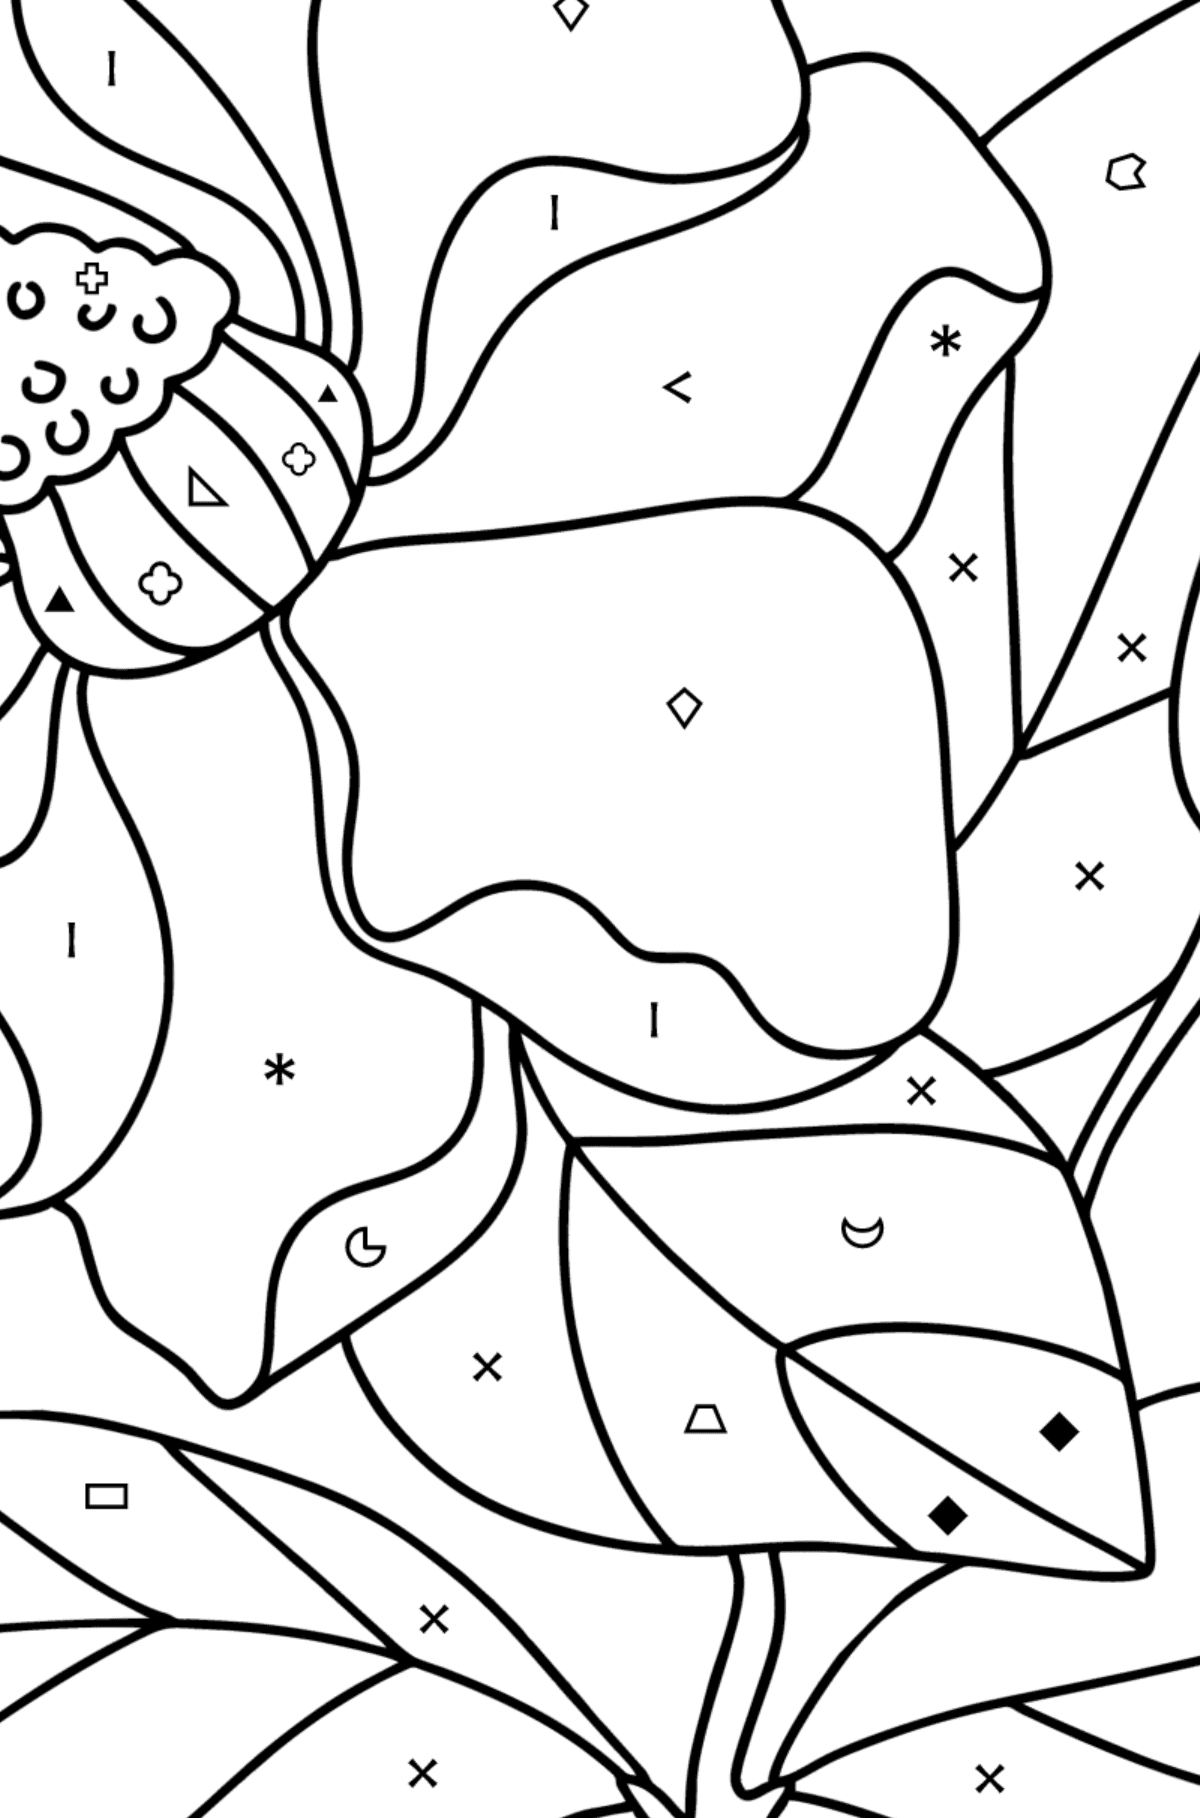 Magnolia coloring page - Coloring by Symbols and Geometric Shapes for Kids